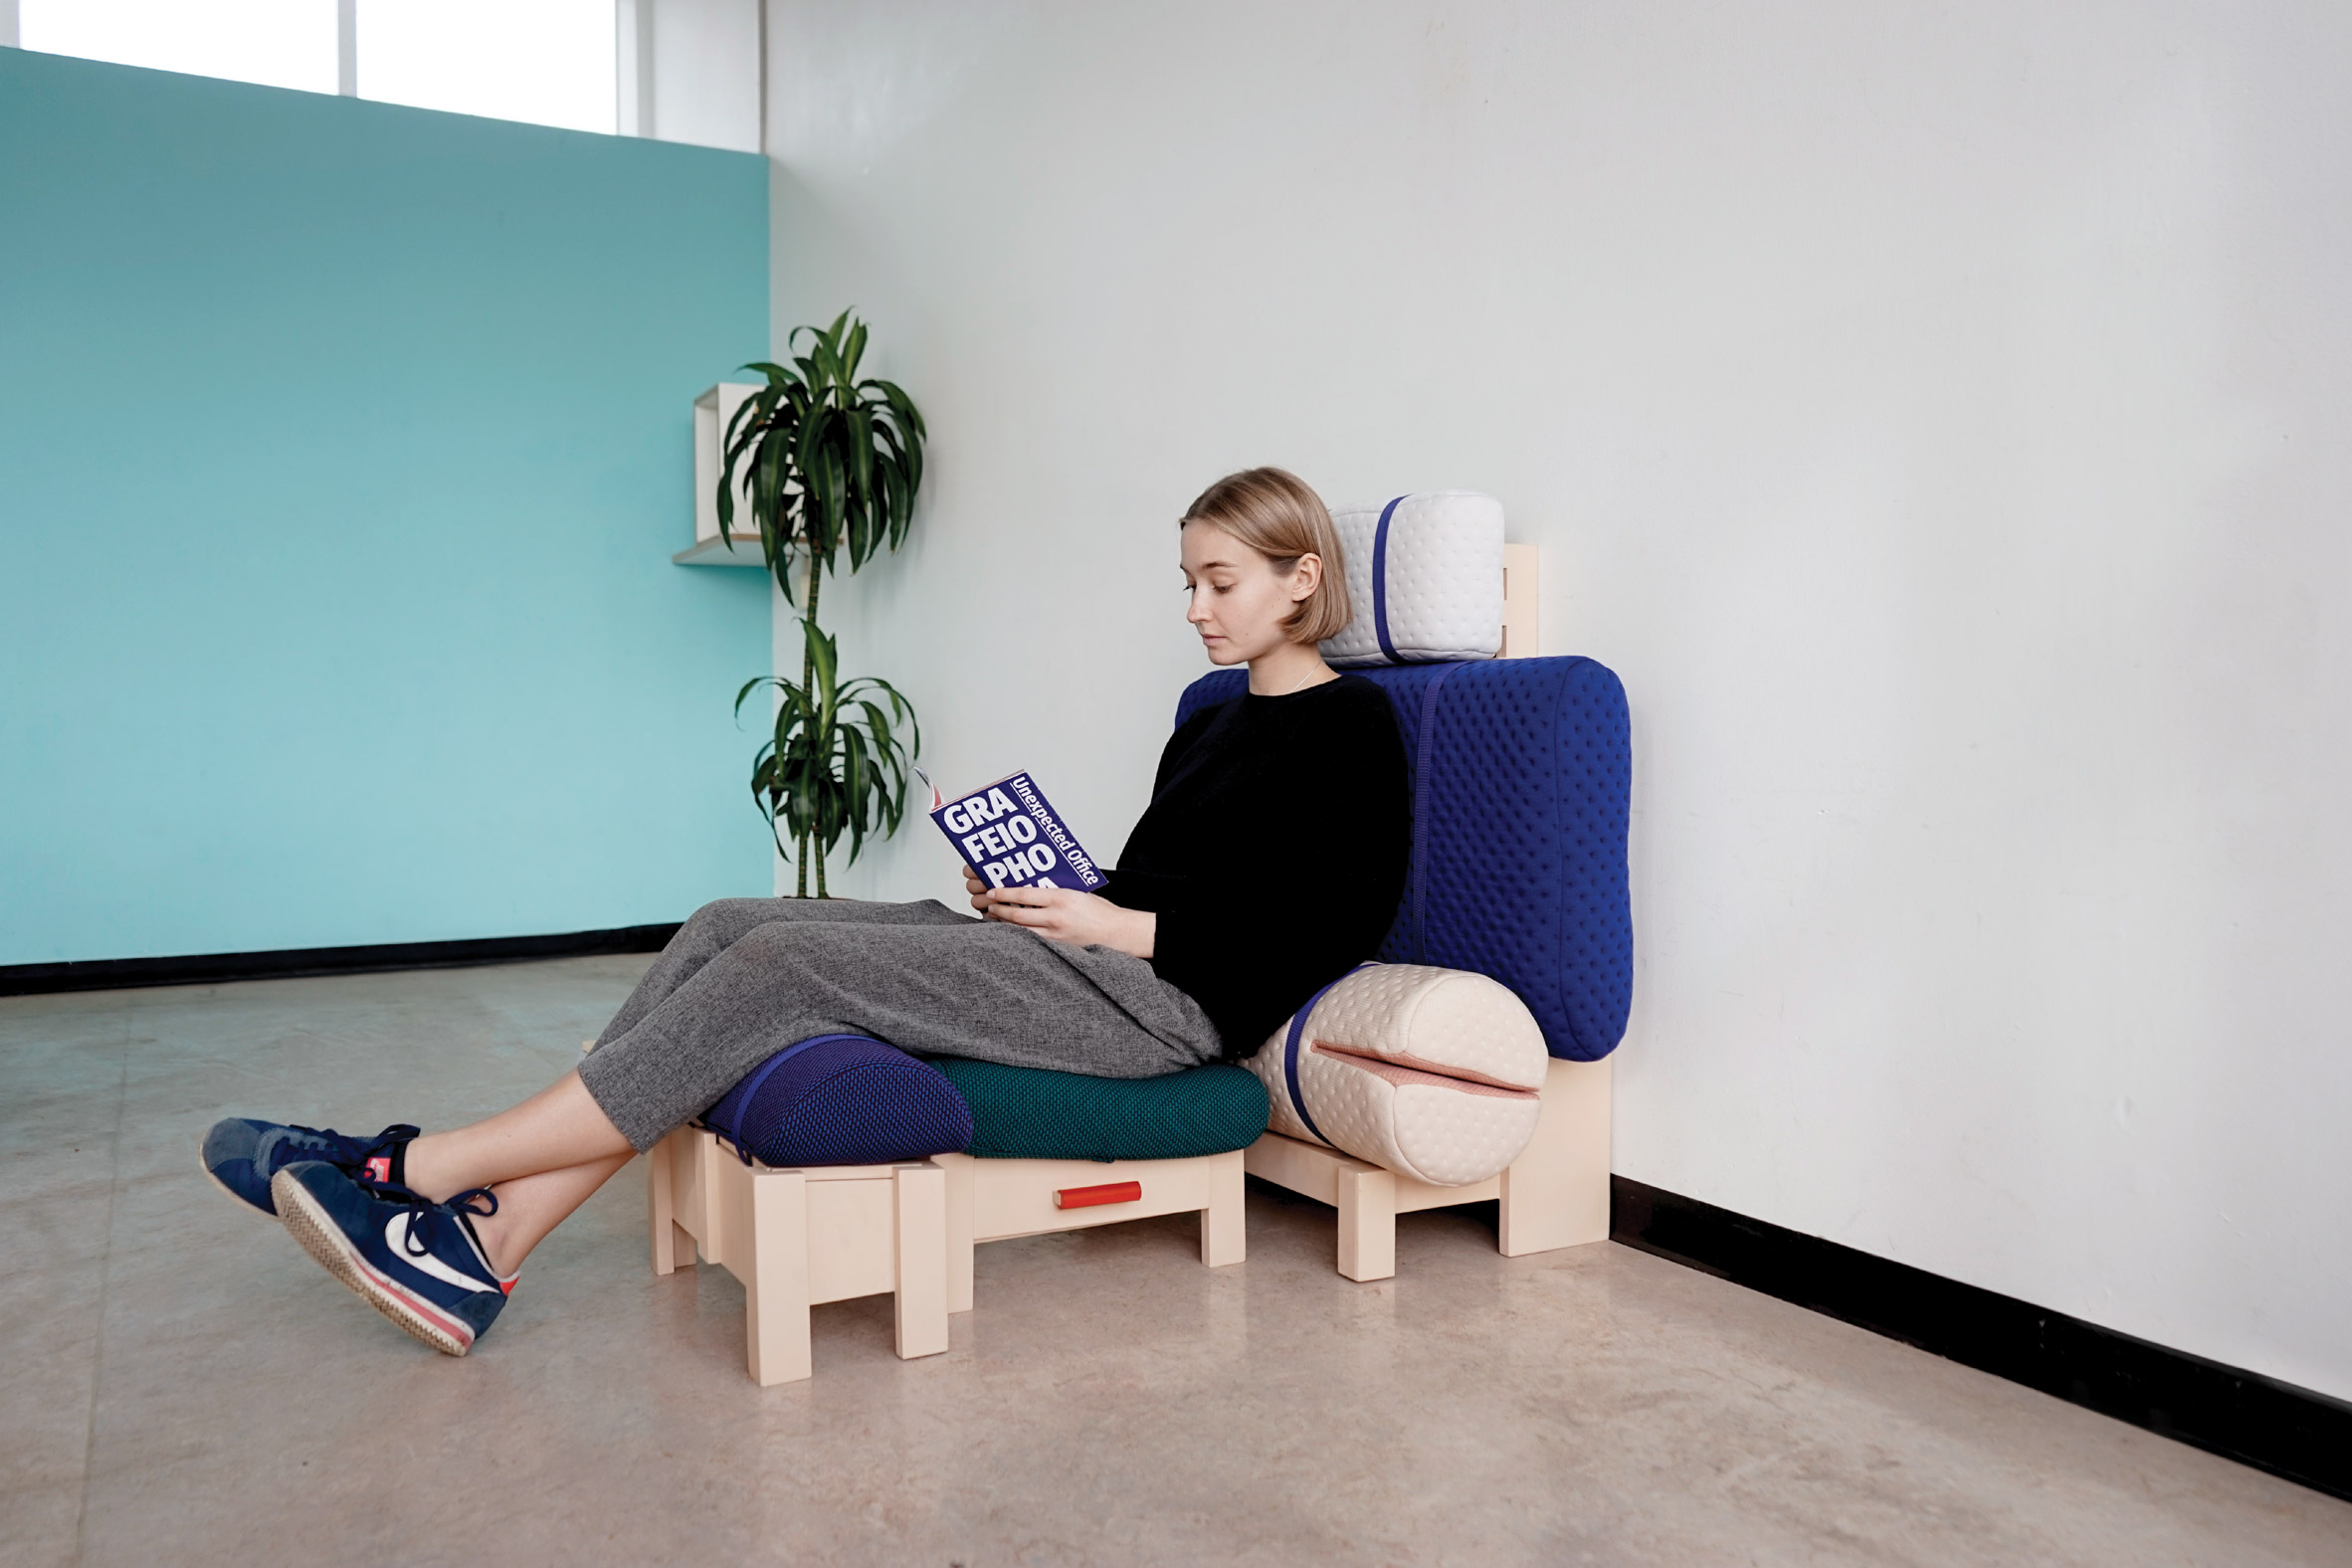 Grafeoiphobia by Geoffrey Pascal is a furniture collection based on beds